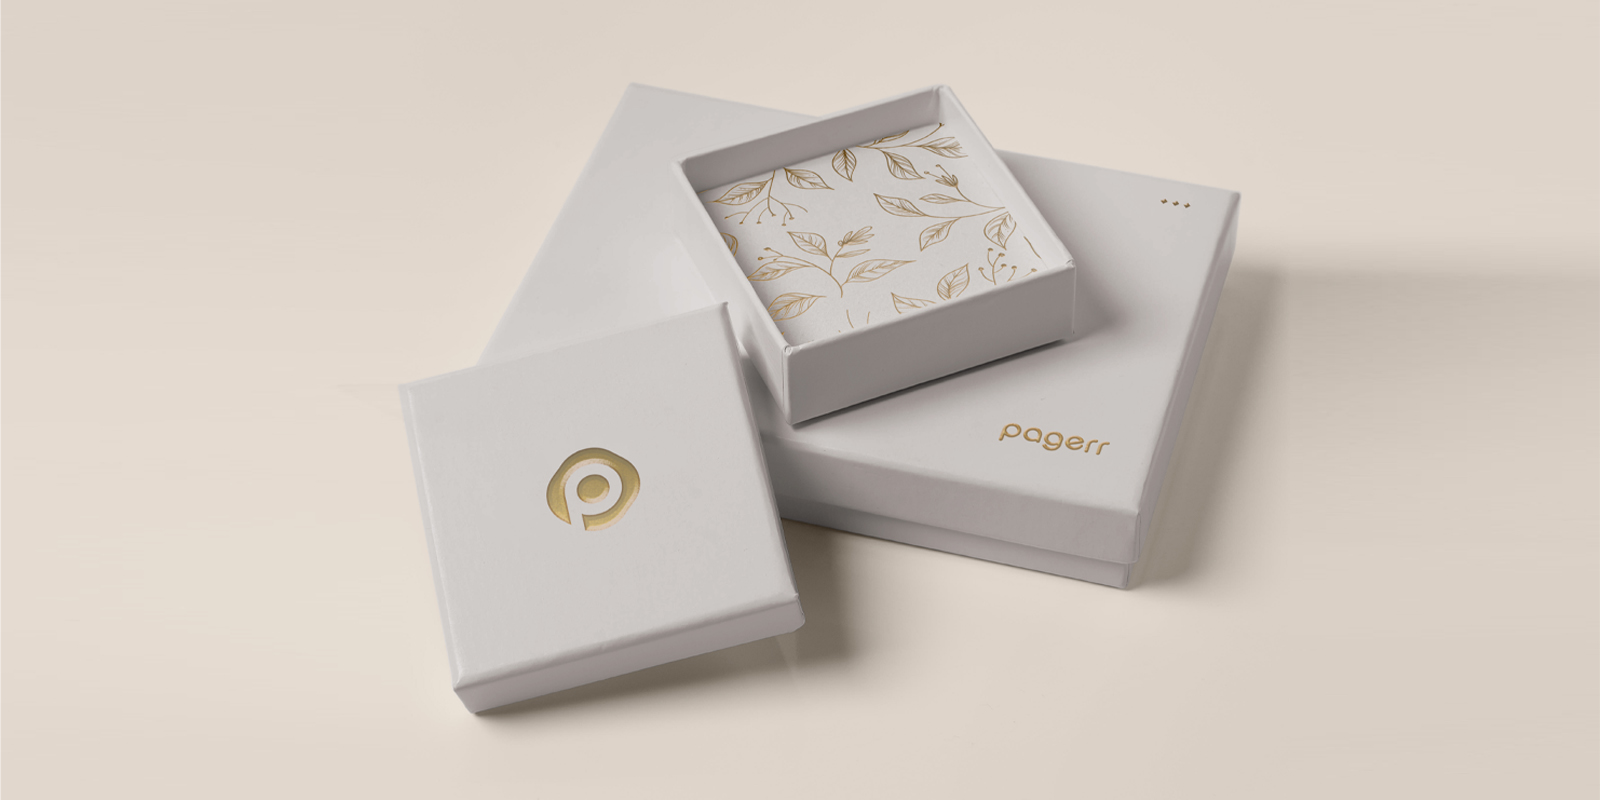 Product boxes in Perth - Print with Pagerr